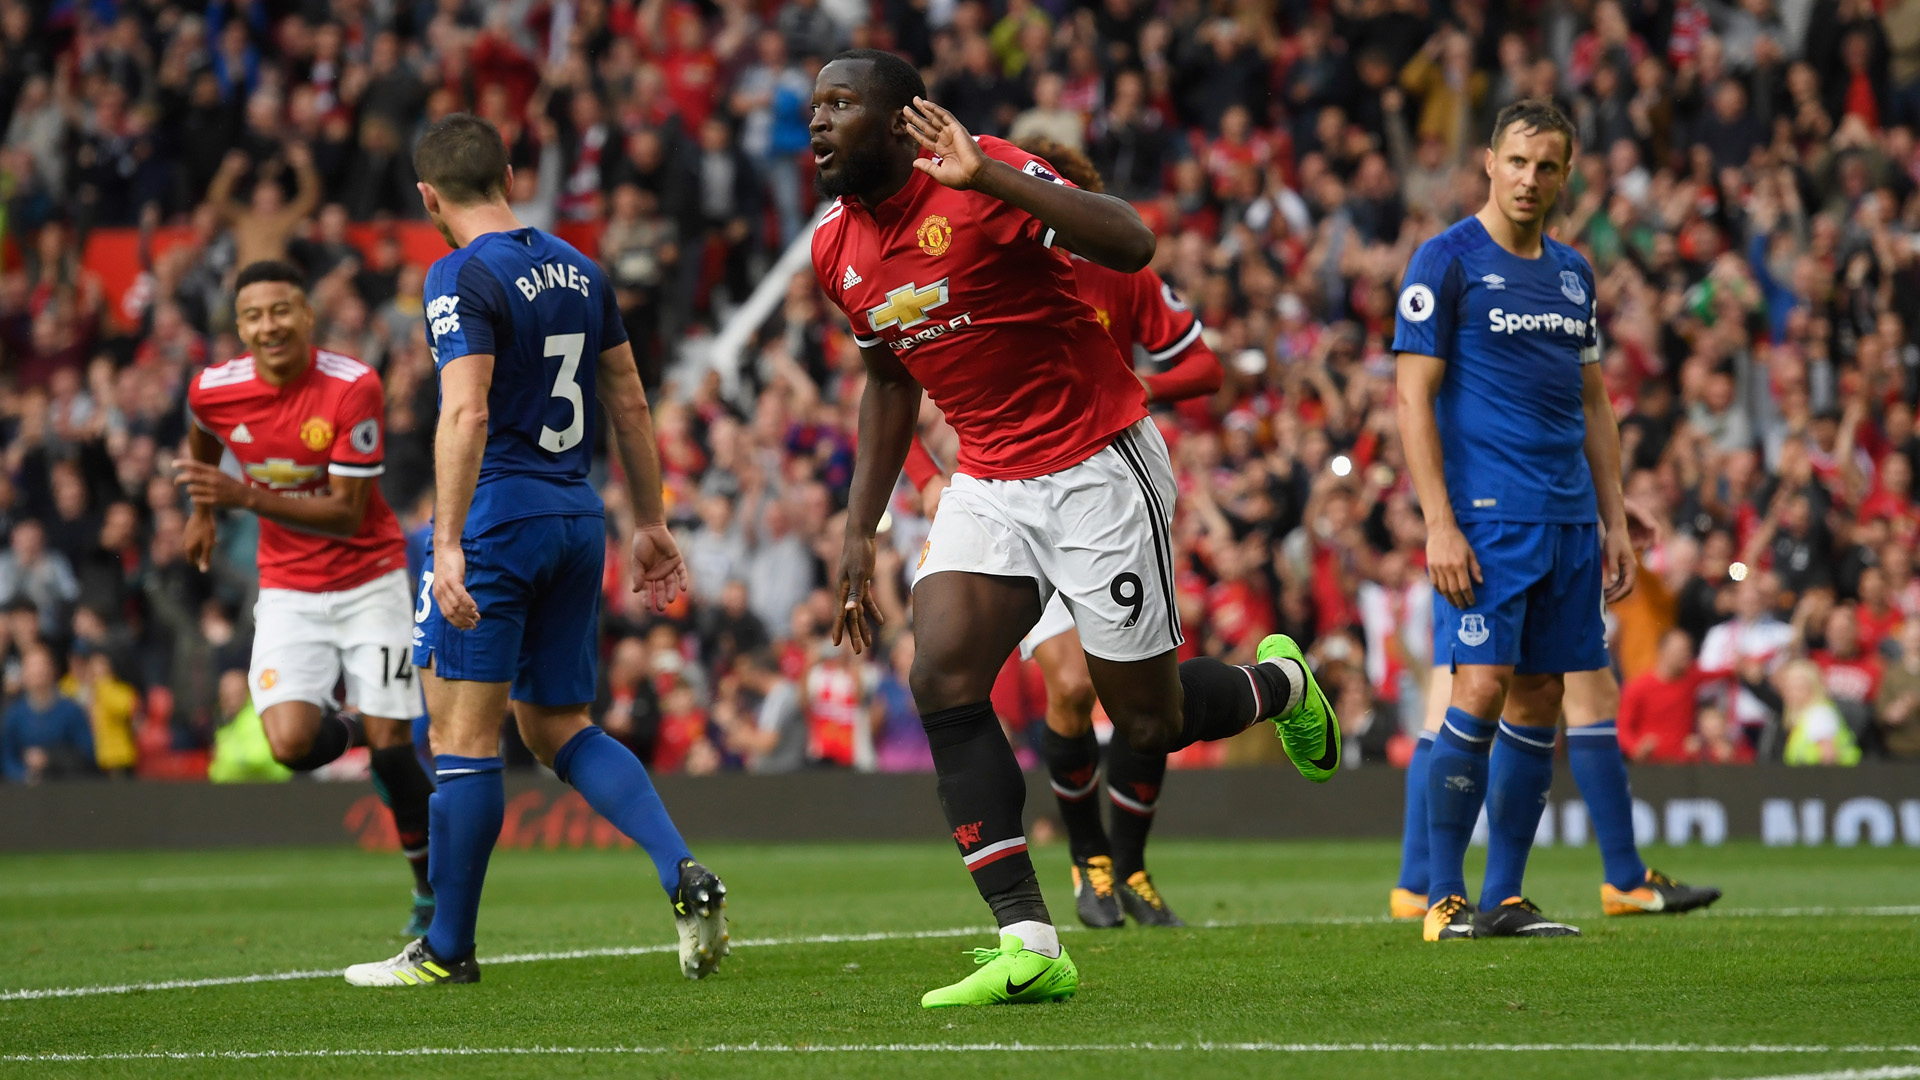 Manchester United are set for a €1 million windfall thanks to the form of former ace Romelu Lukaku.